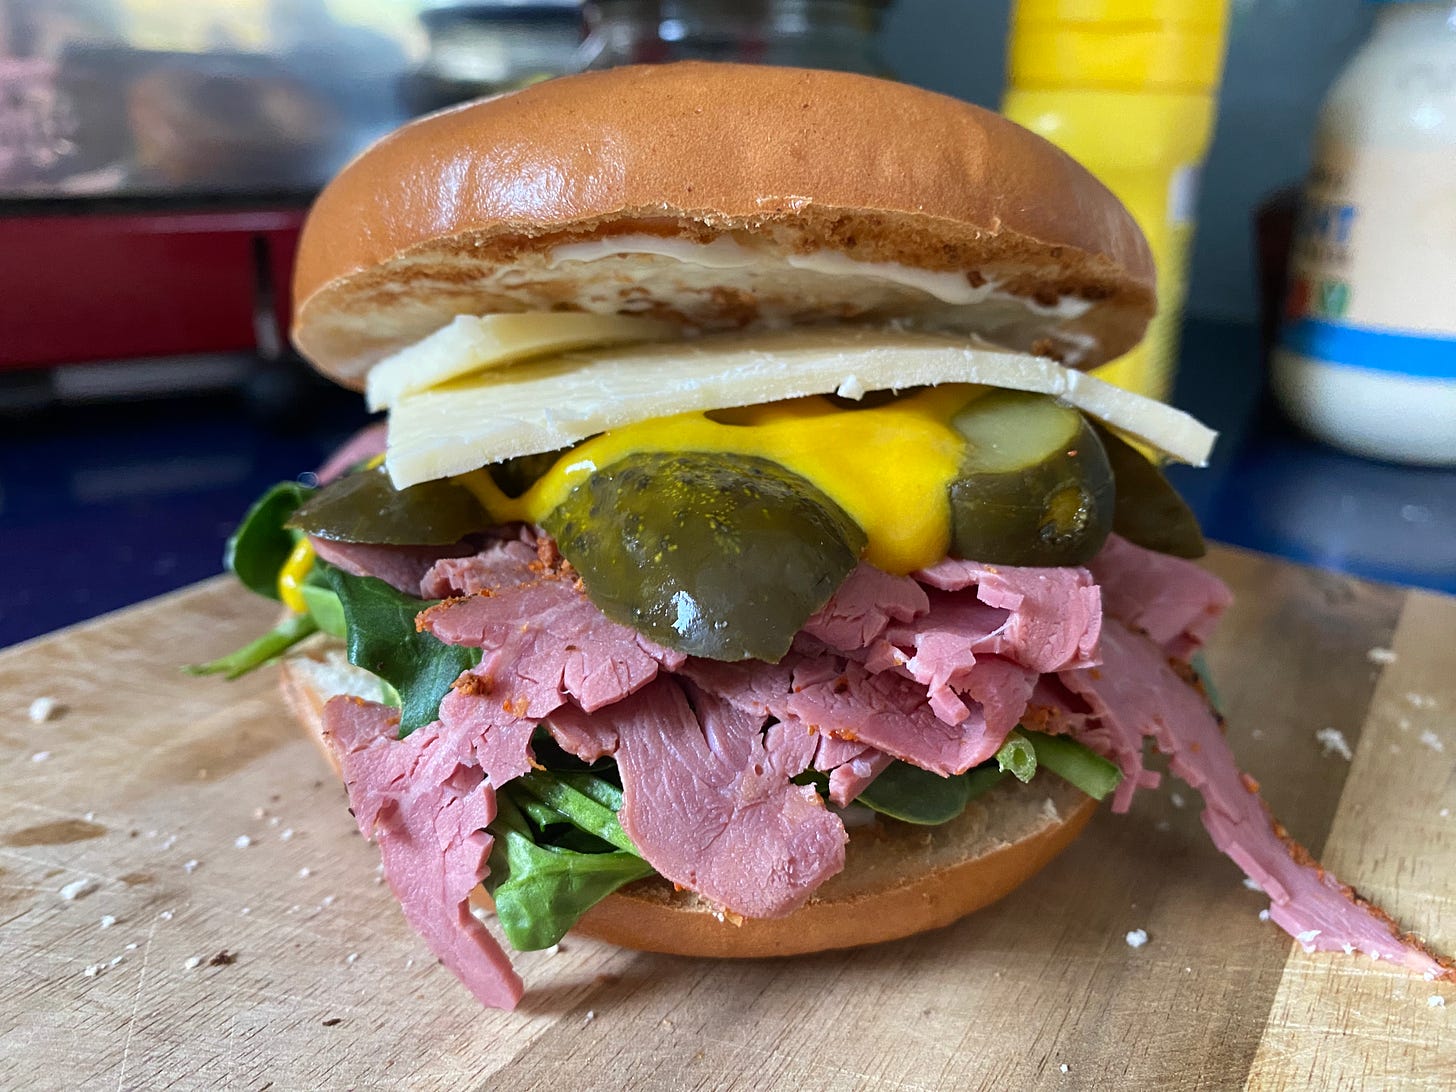 Bagel sandwich filled with pastrami, lettuce leaves, pickles, mustard, and cheese. The bagel is placed on wooden board